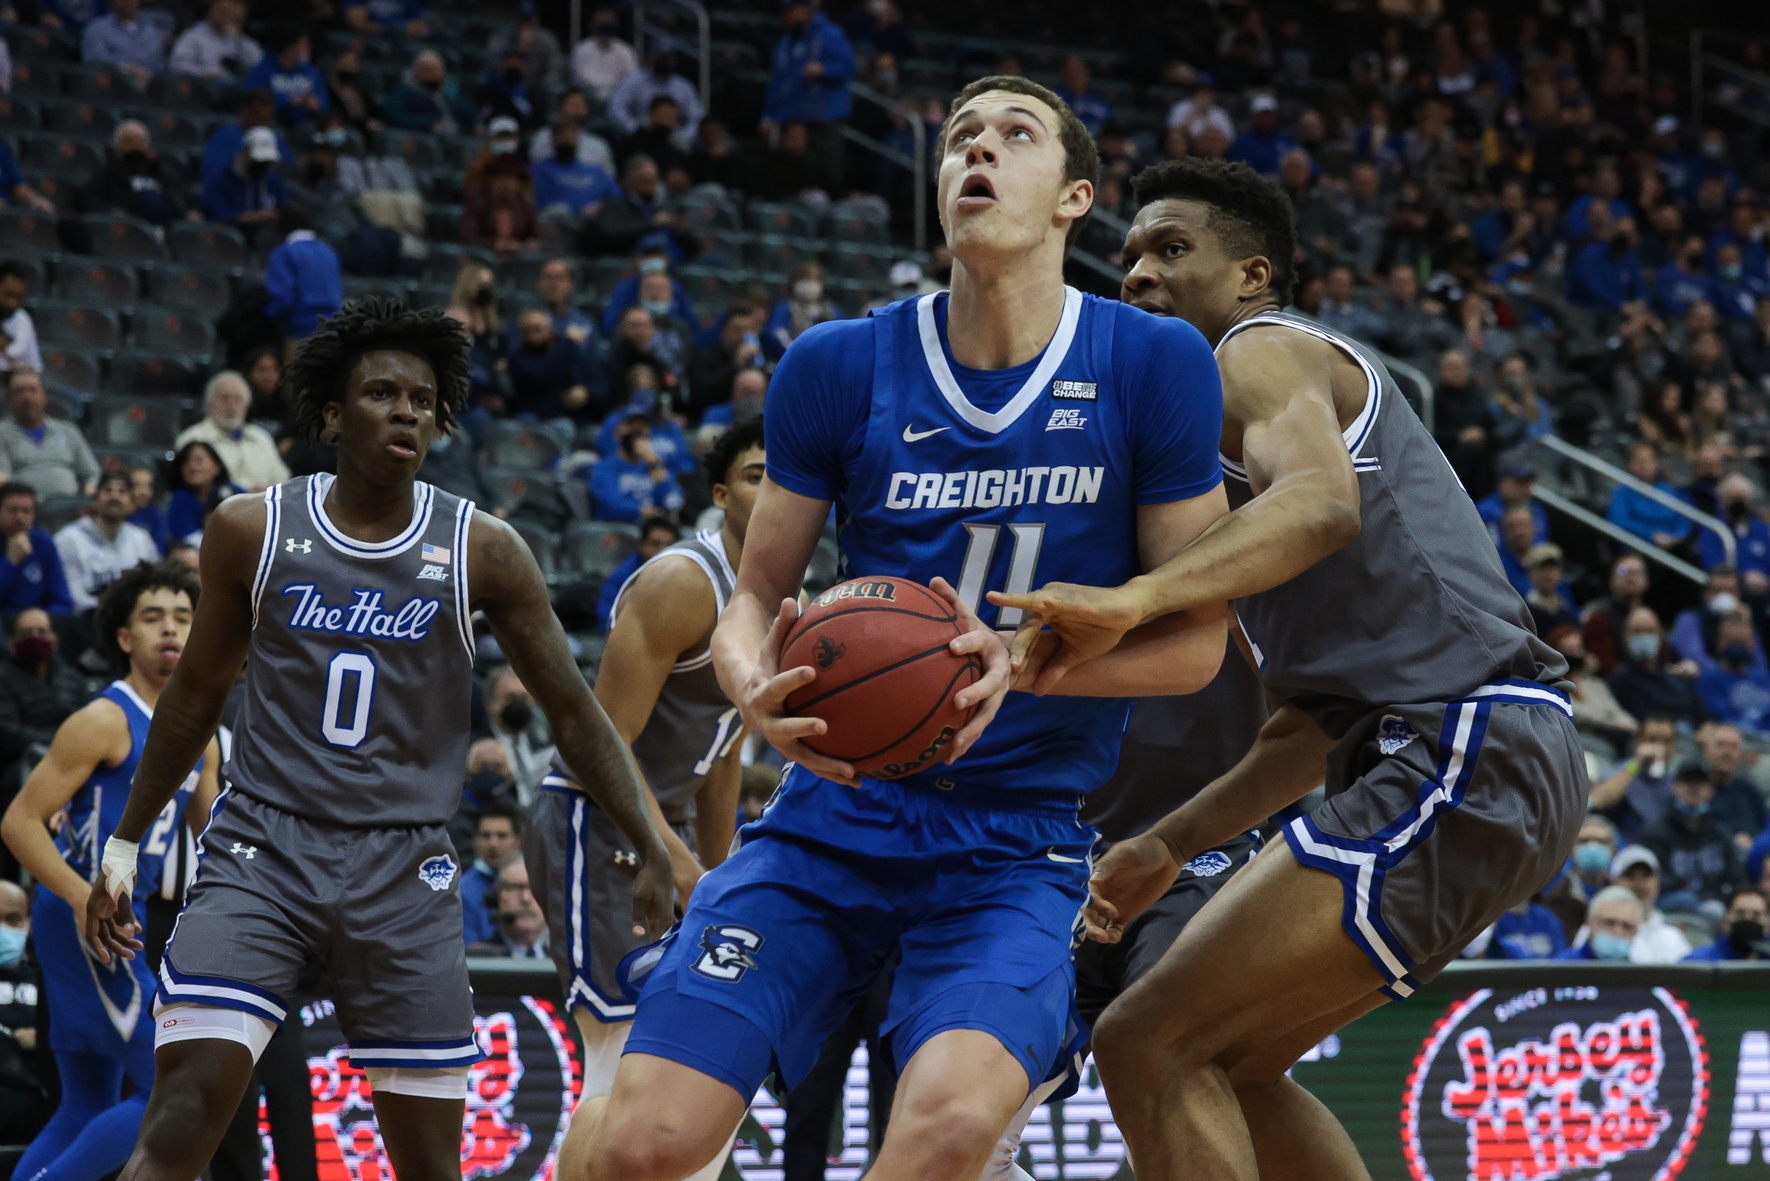 Holy Cross Crusaders vs Creighton Bluejays Prediction, 11/14/2022 College Basketball Picks, Best Bets & Odds